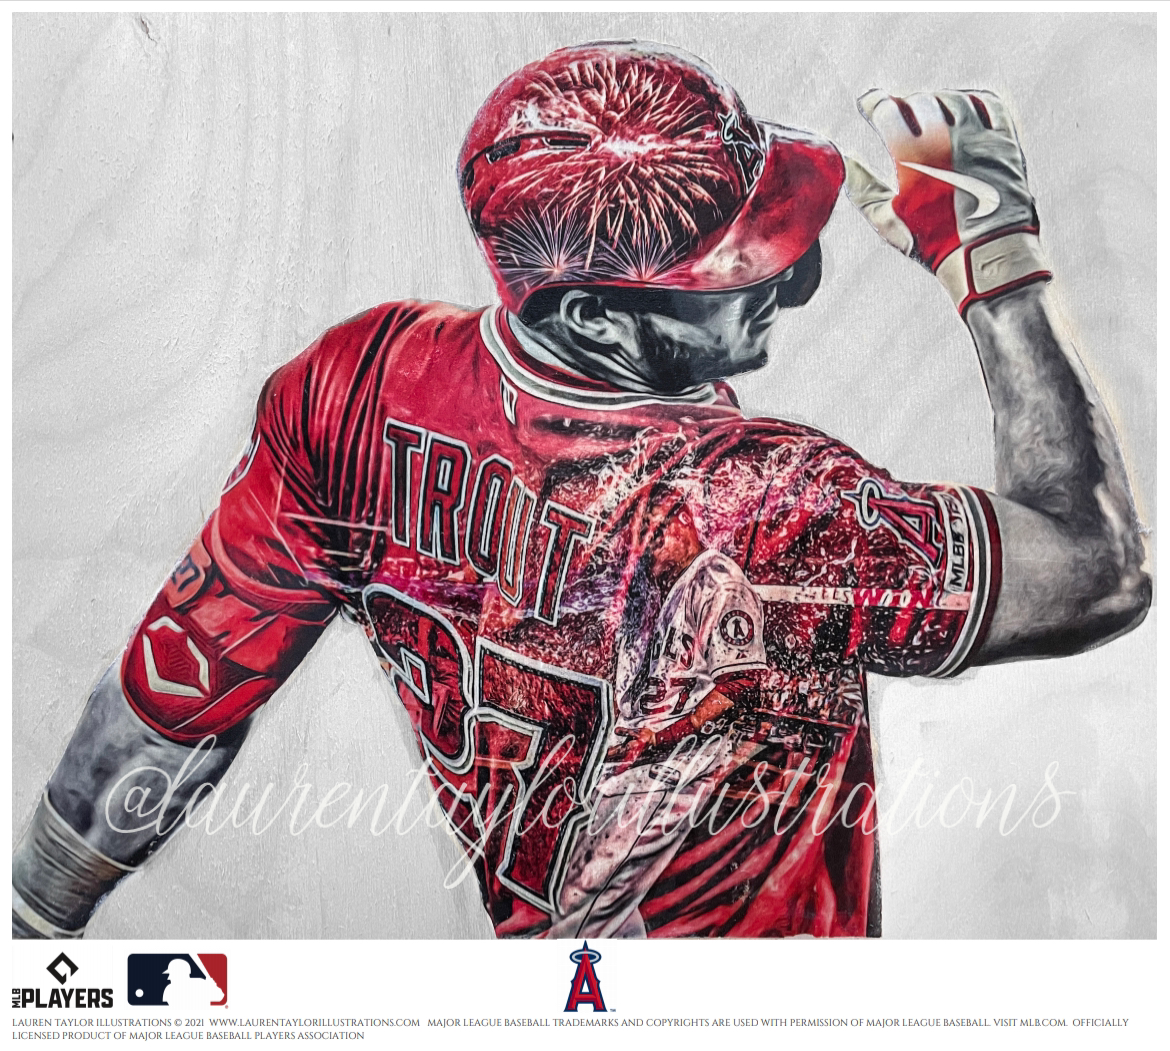 King Fisher 2.0 (Mike Trout) Los Angeles Angels - Officially License